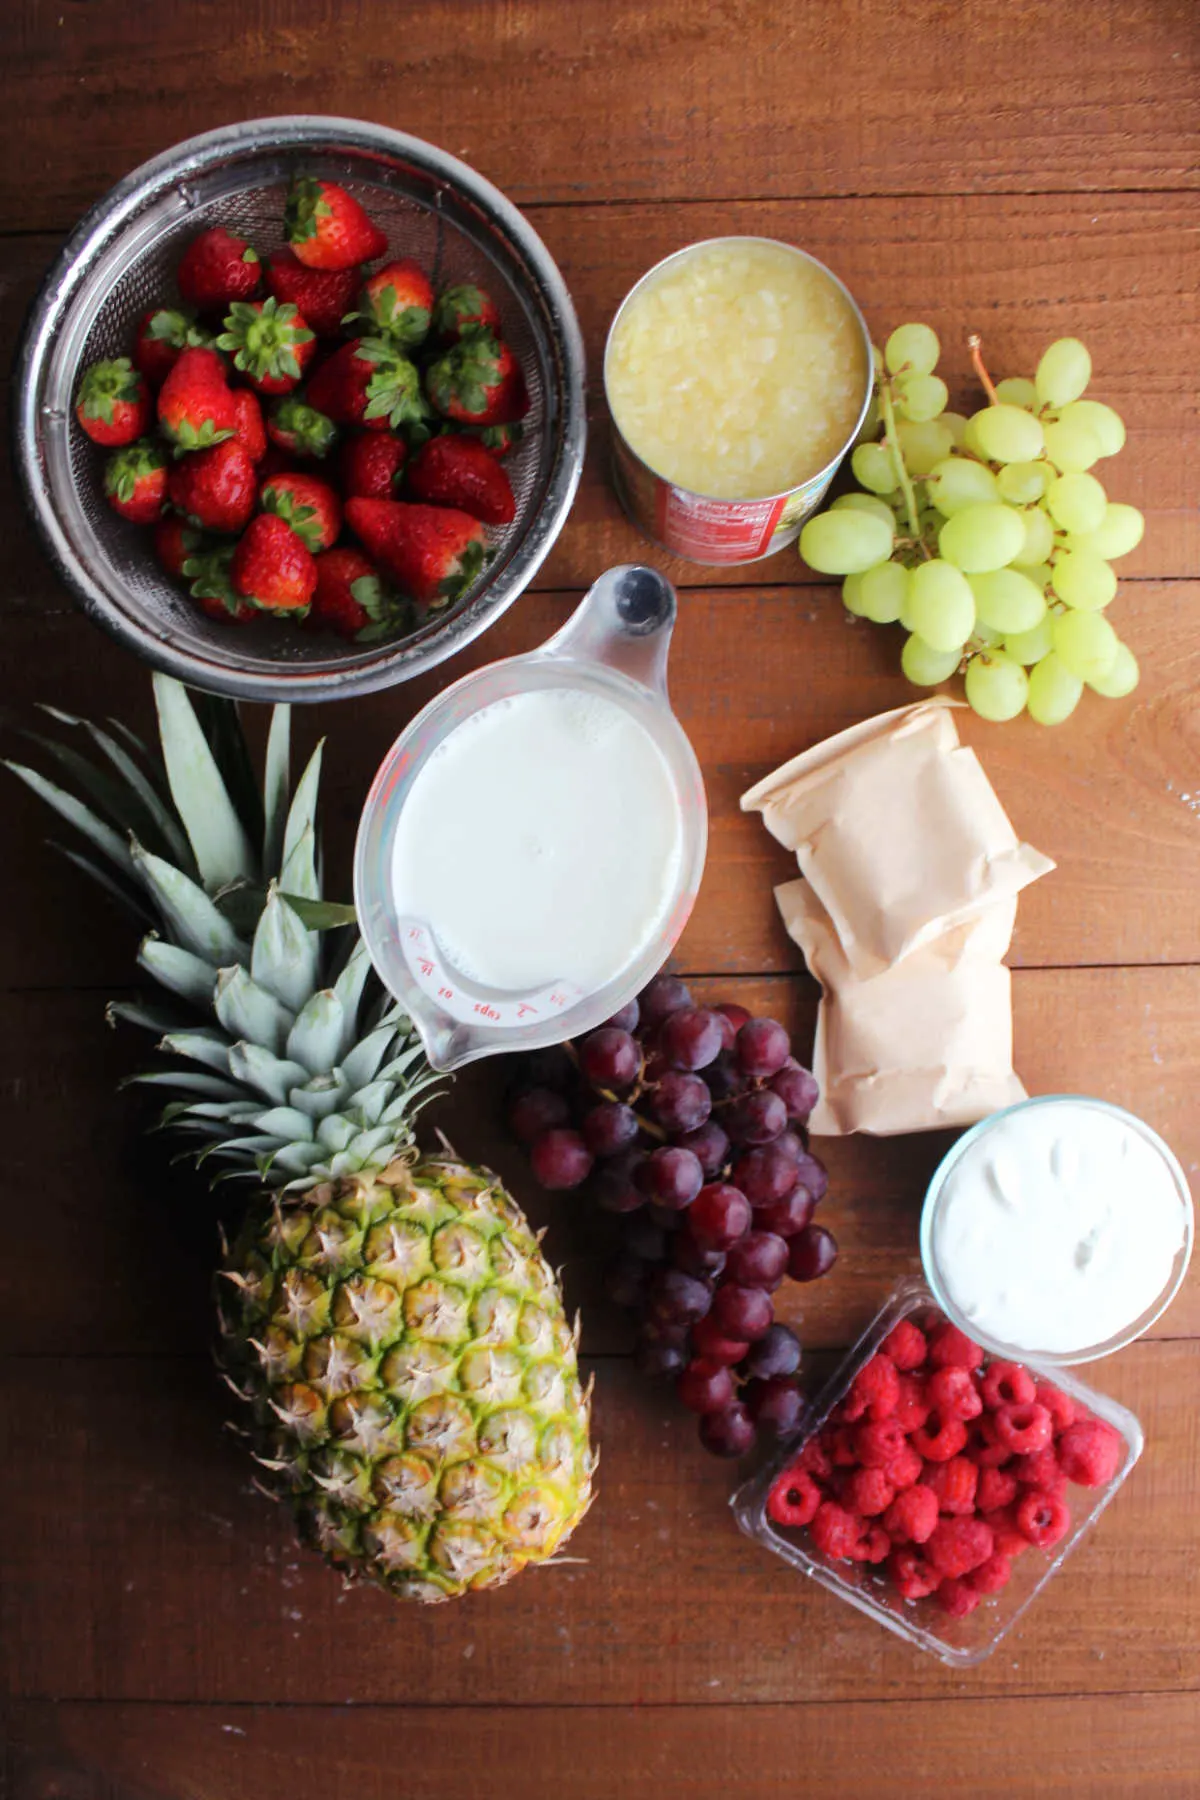 Ingredients including pineapple, strawberries, crushed pineapple, grapes, instant pudding mix, milk, sour cream, and raspberries, ready to be made into fruit salad.